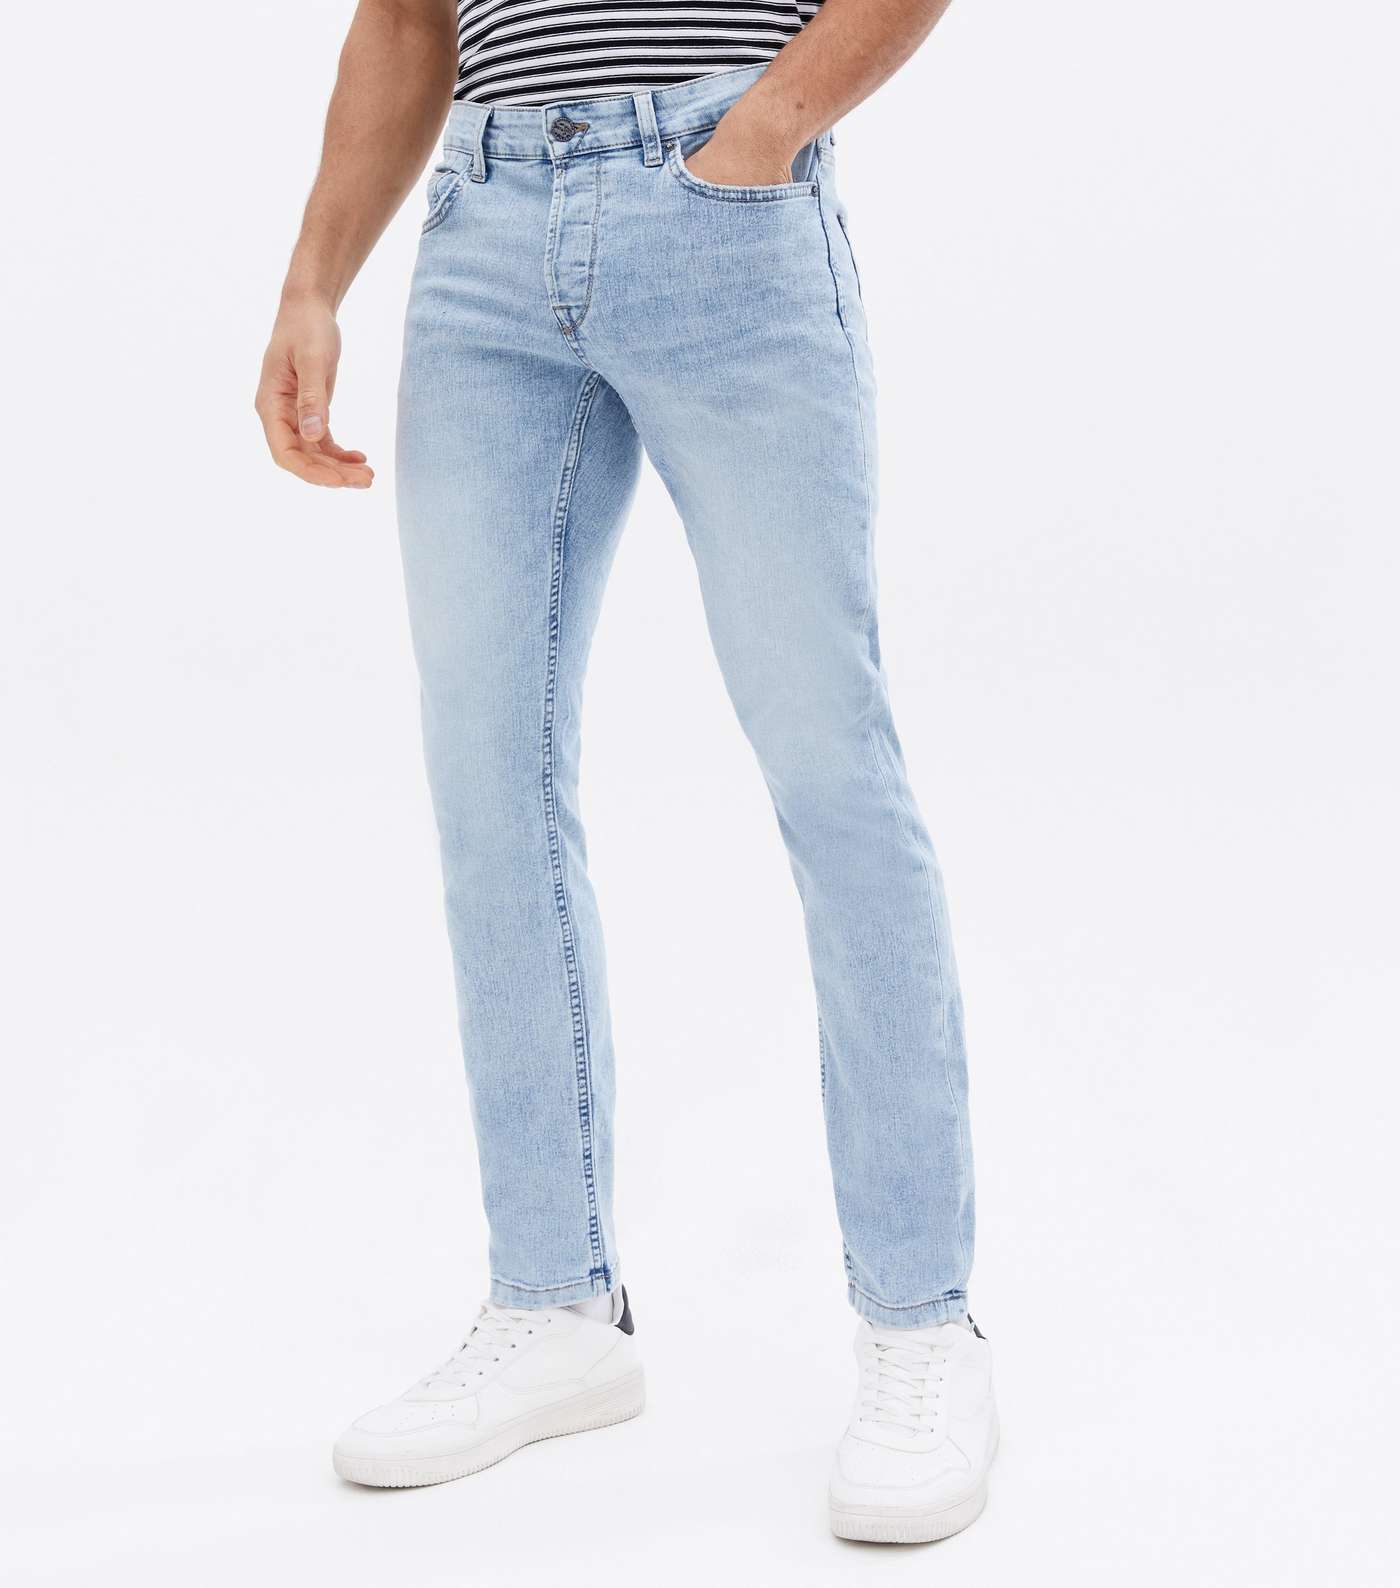 Only & Sons Pale Blue Slim Fit Jeans Image 2